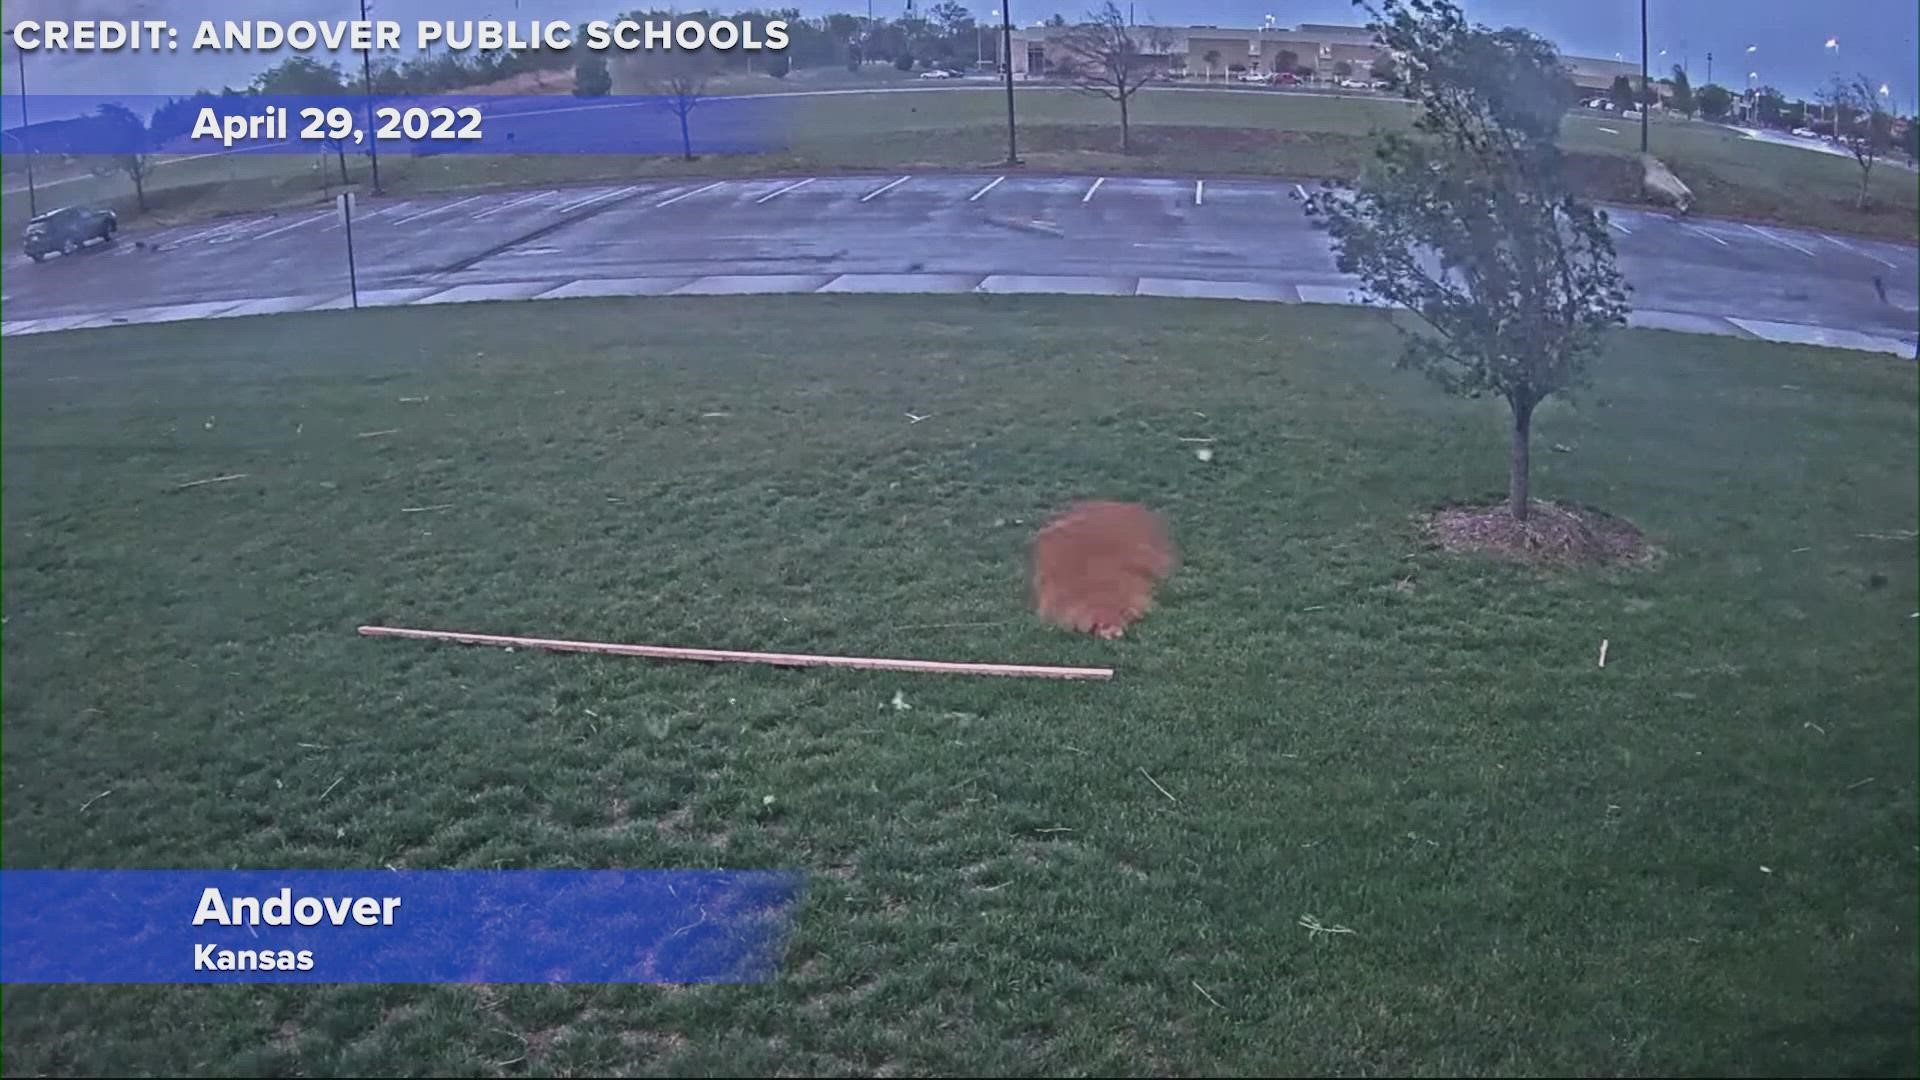 A Kansas school district has released surveillance video showing the damaged caused by a tornado in April.